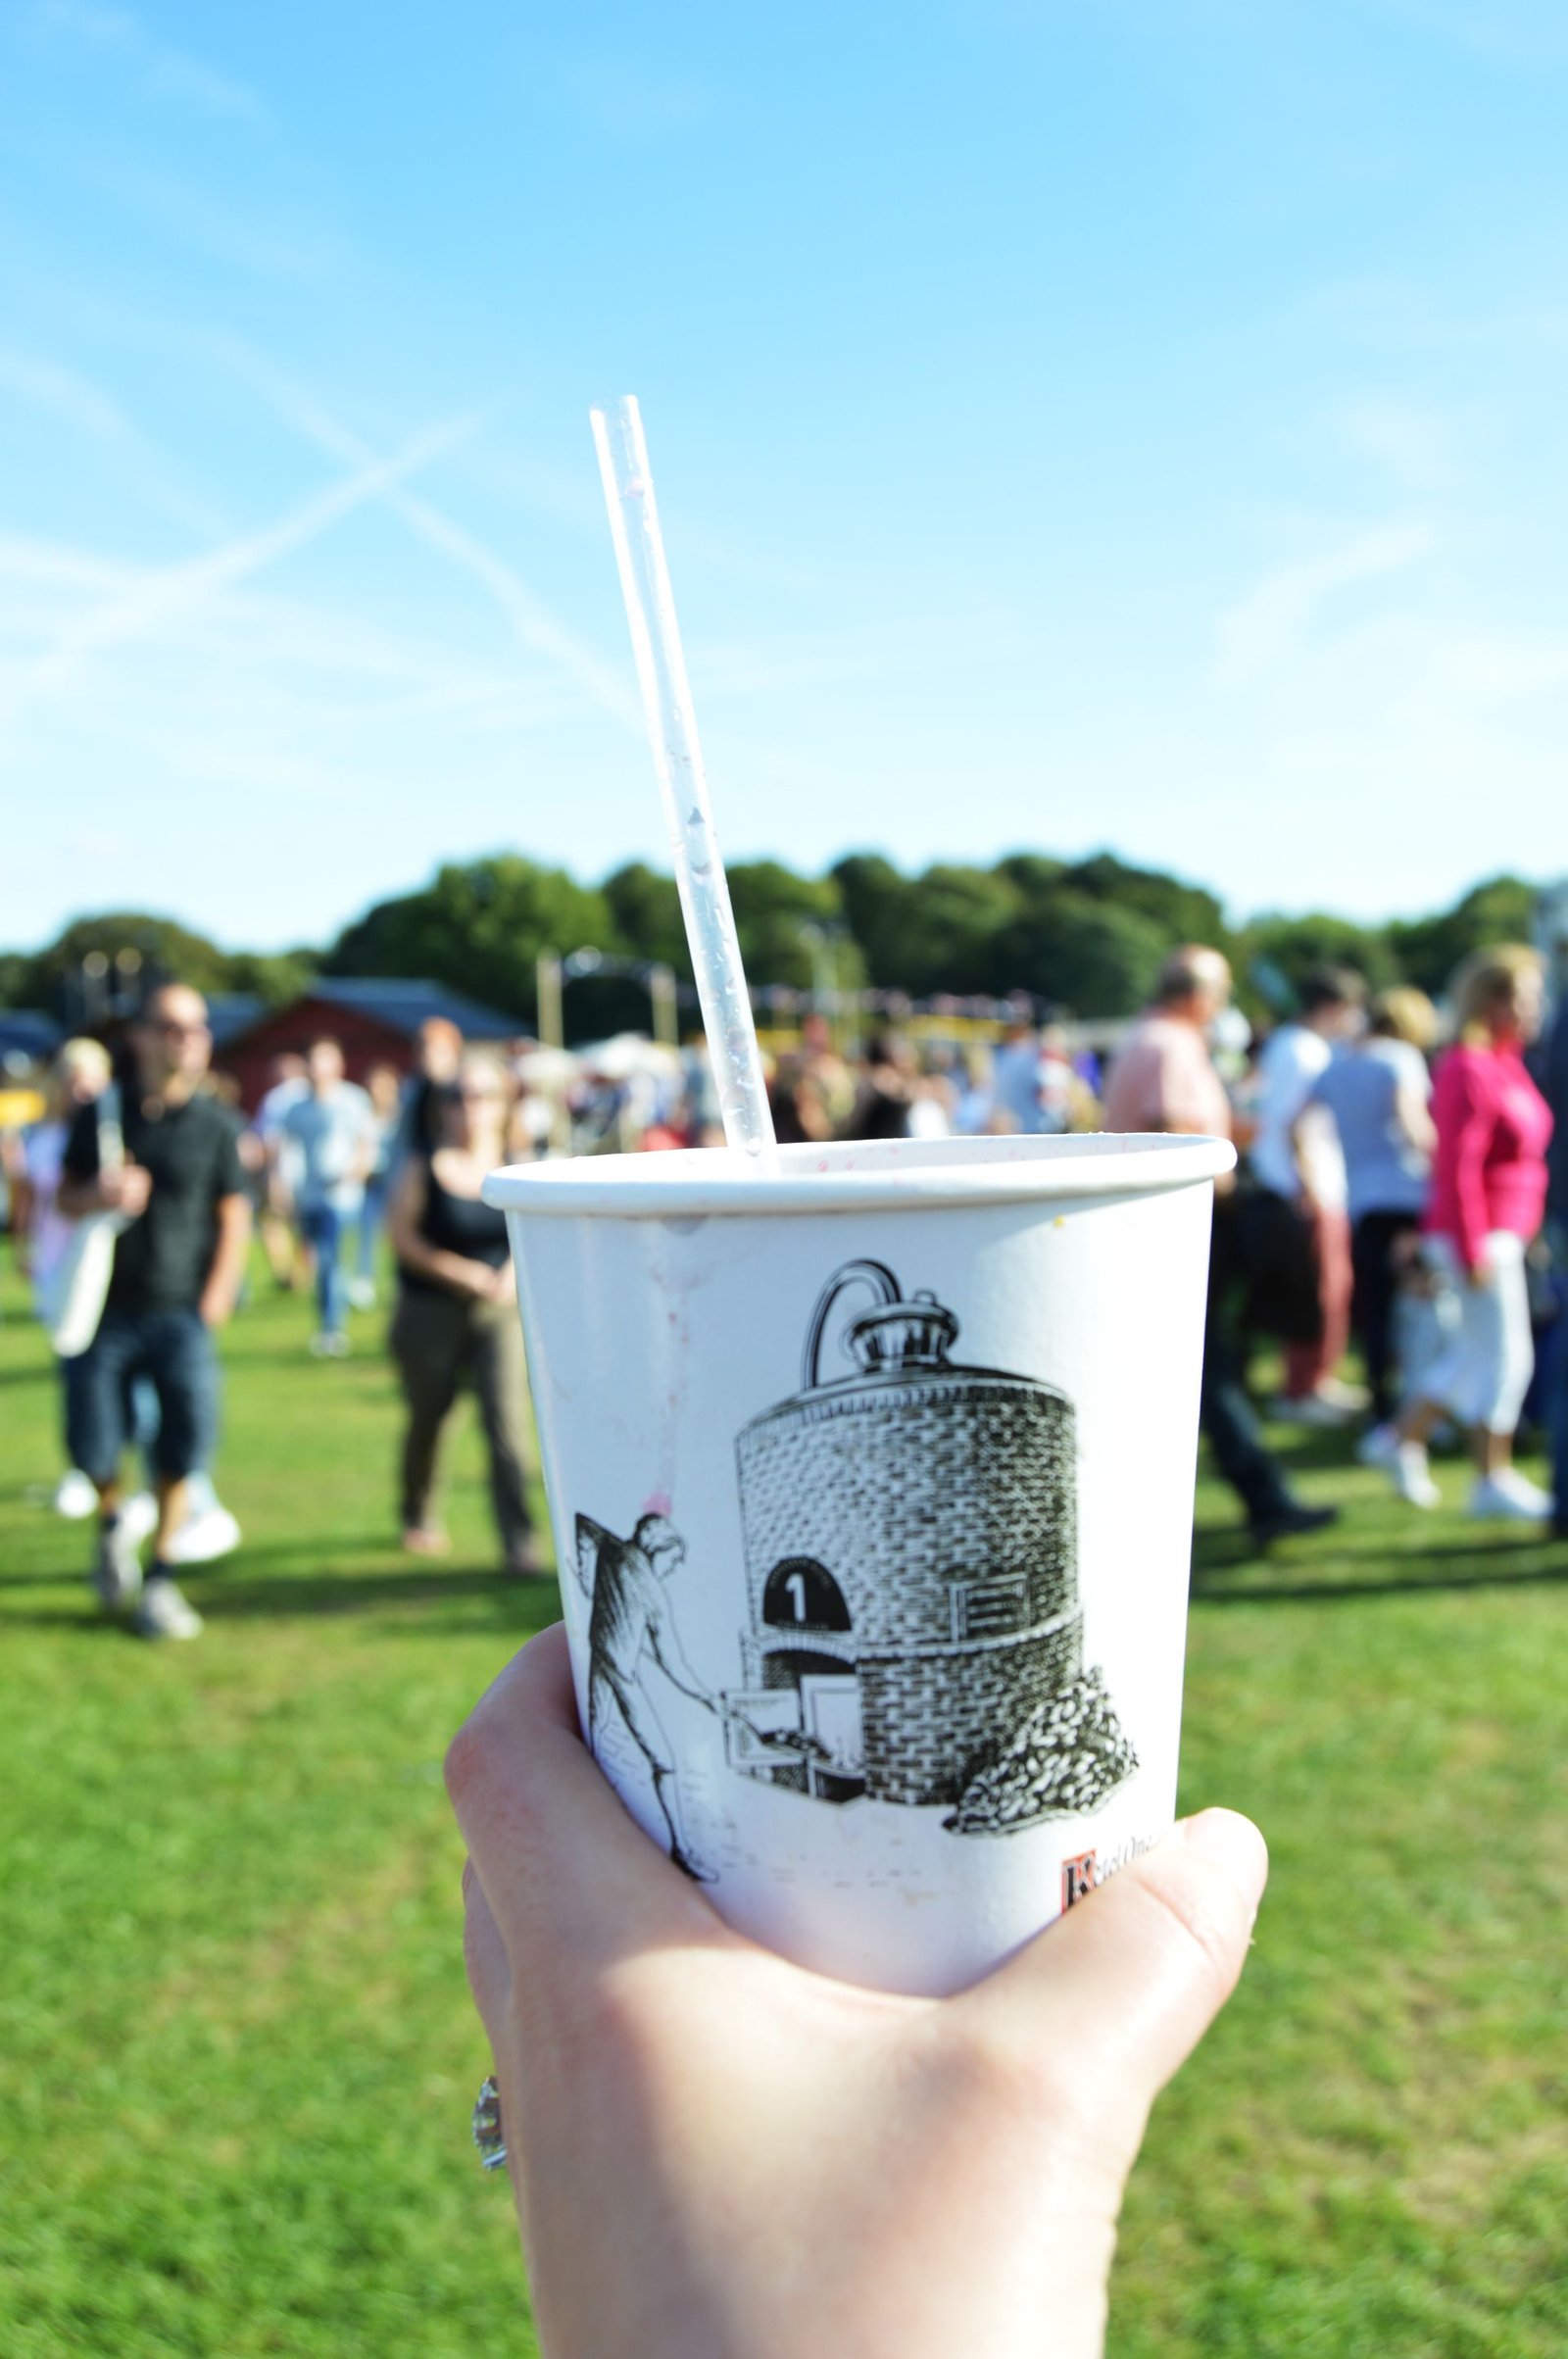 Liverpool Food and Drink Festival is great for tasting so many different food and drinks. You can taste so food from all around the world, food festivals are perfect for it. 